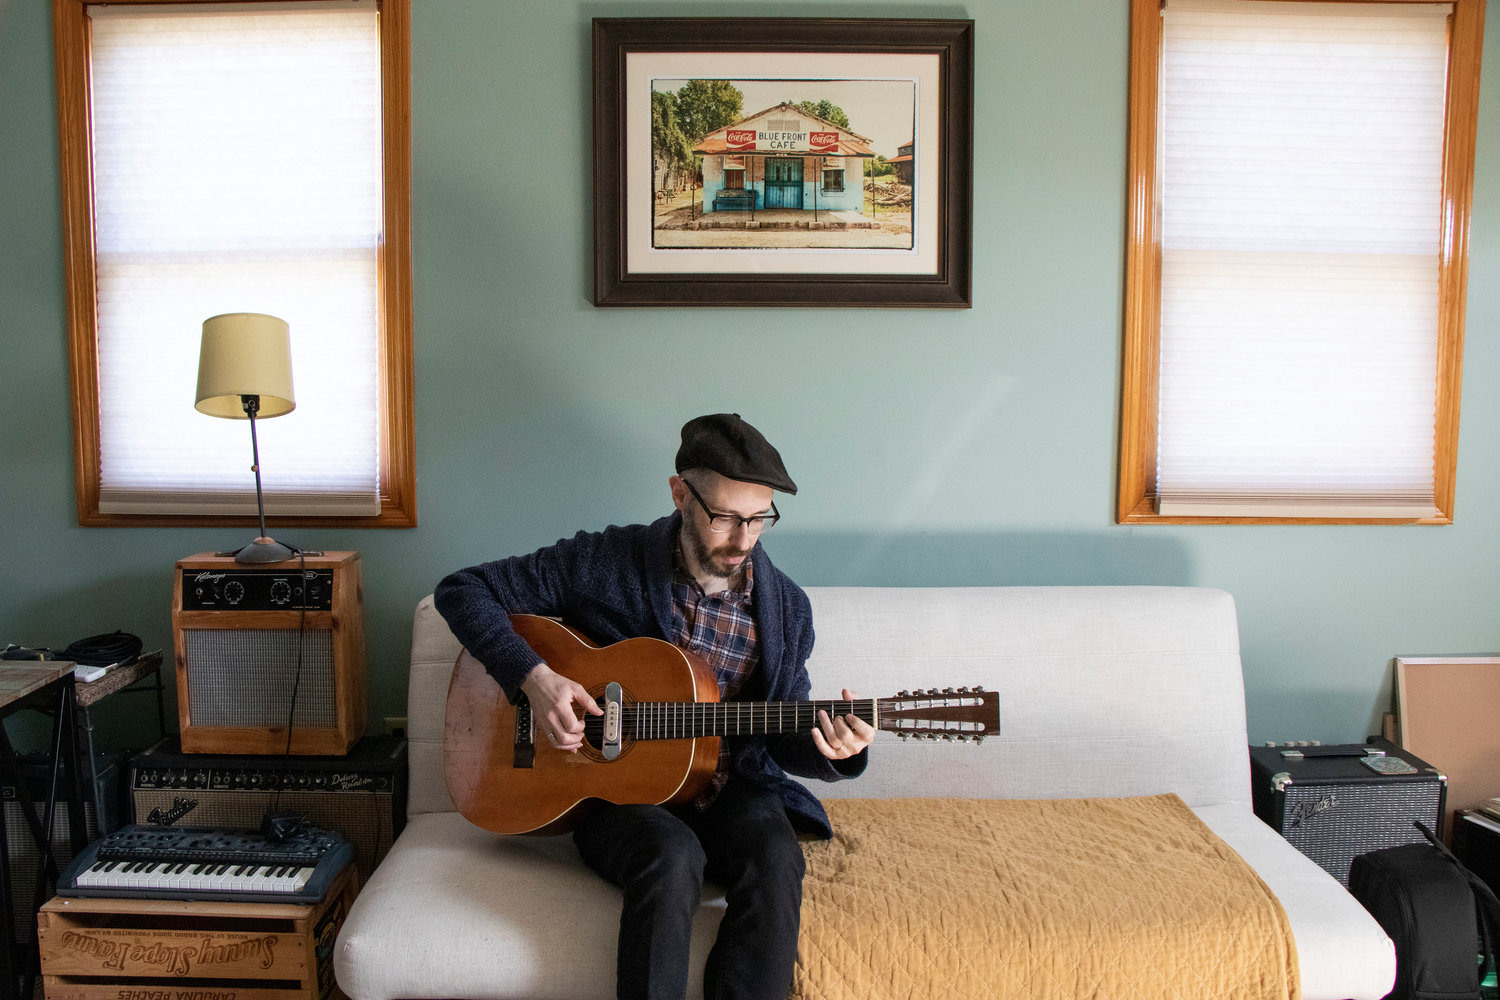 Ryan Lee Crosby in his home practice space in Island Park. Above him is a photo of the Blue Front Cafe, an old juke joint in Bentonia, Miss., where he has performed.